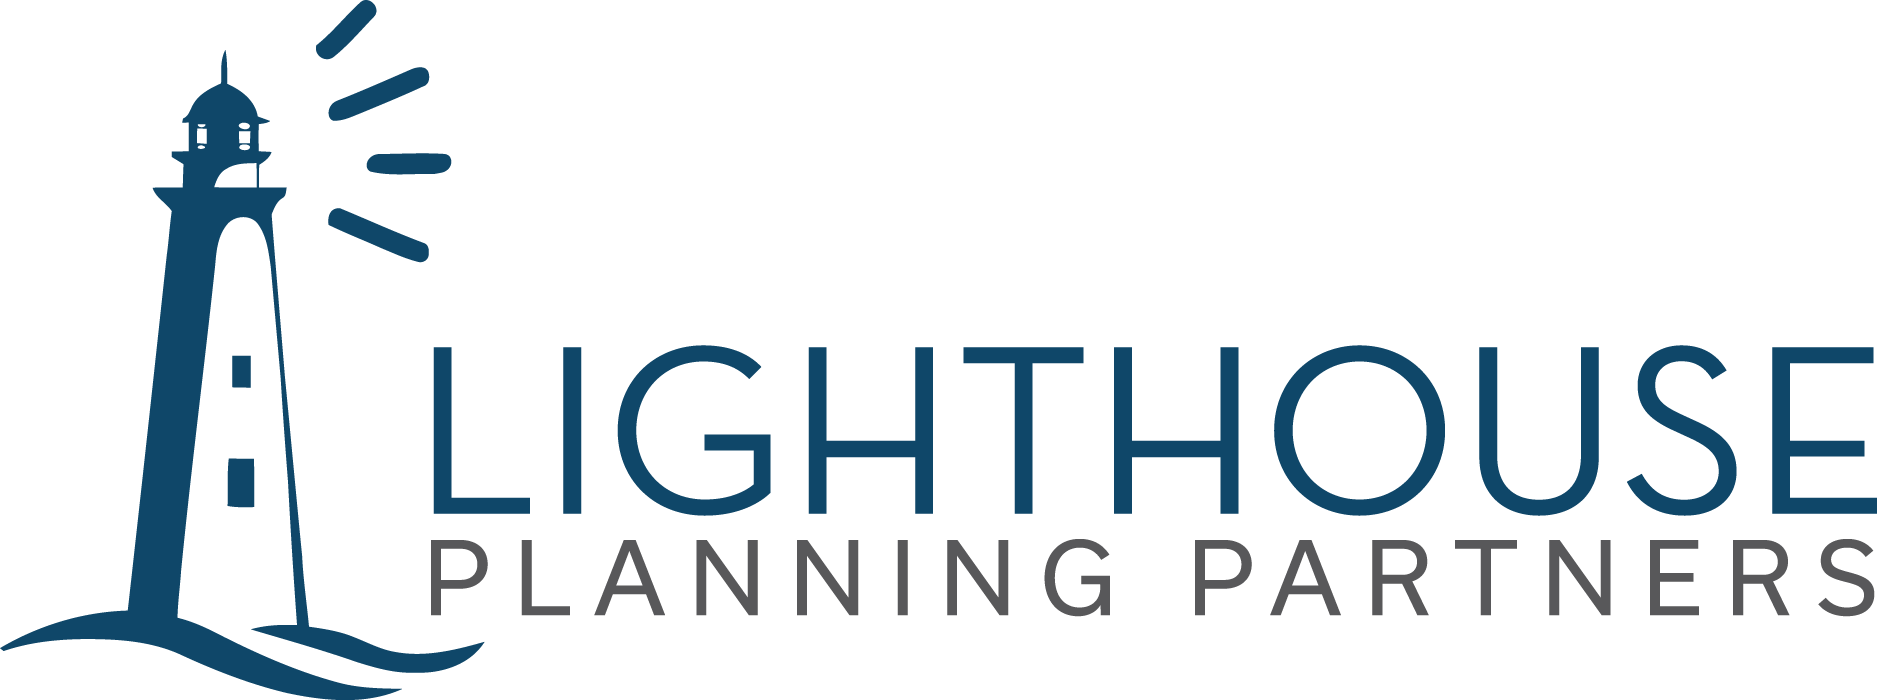 Lighthouse Planning Partners